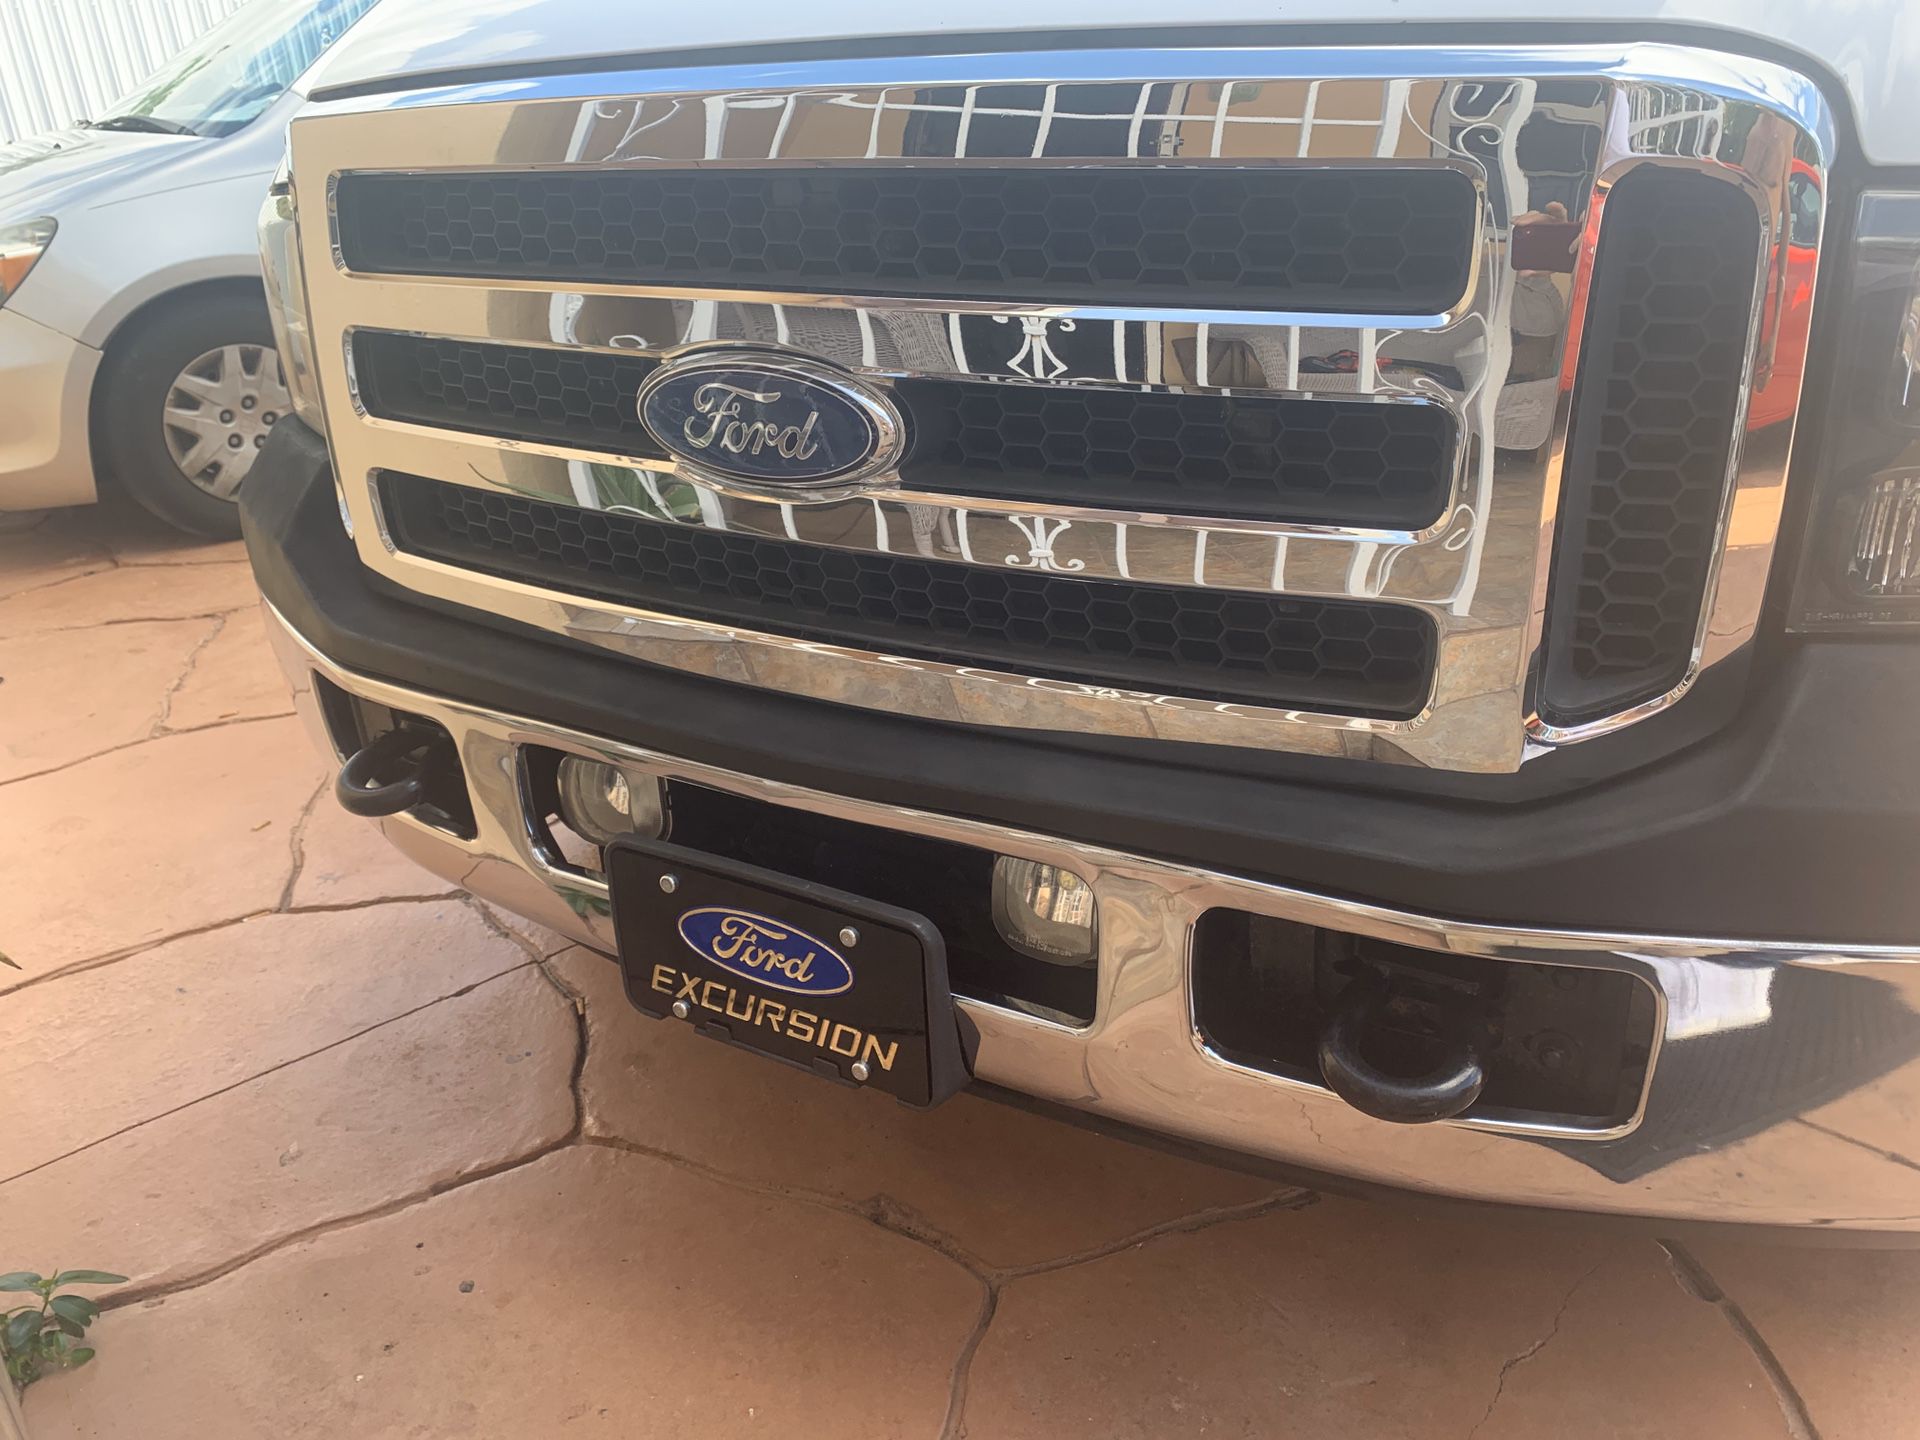 Ford Excursion For Sale